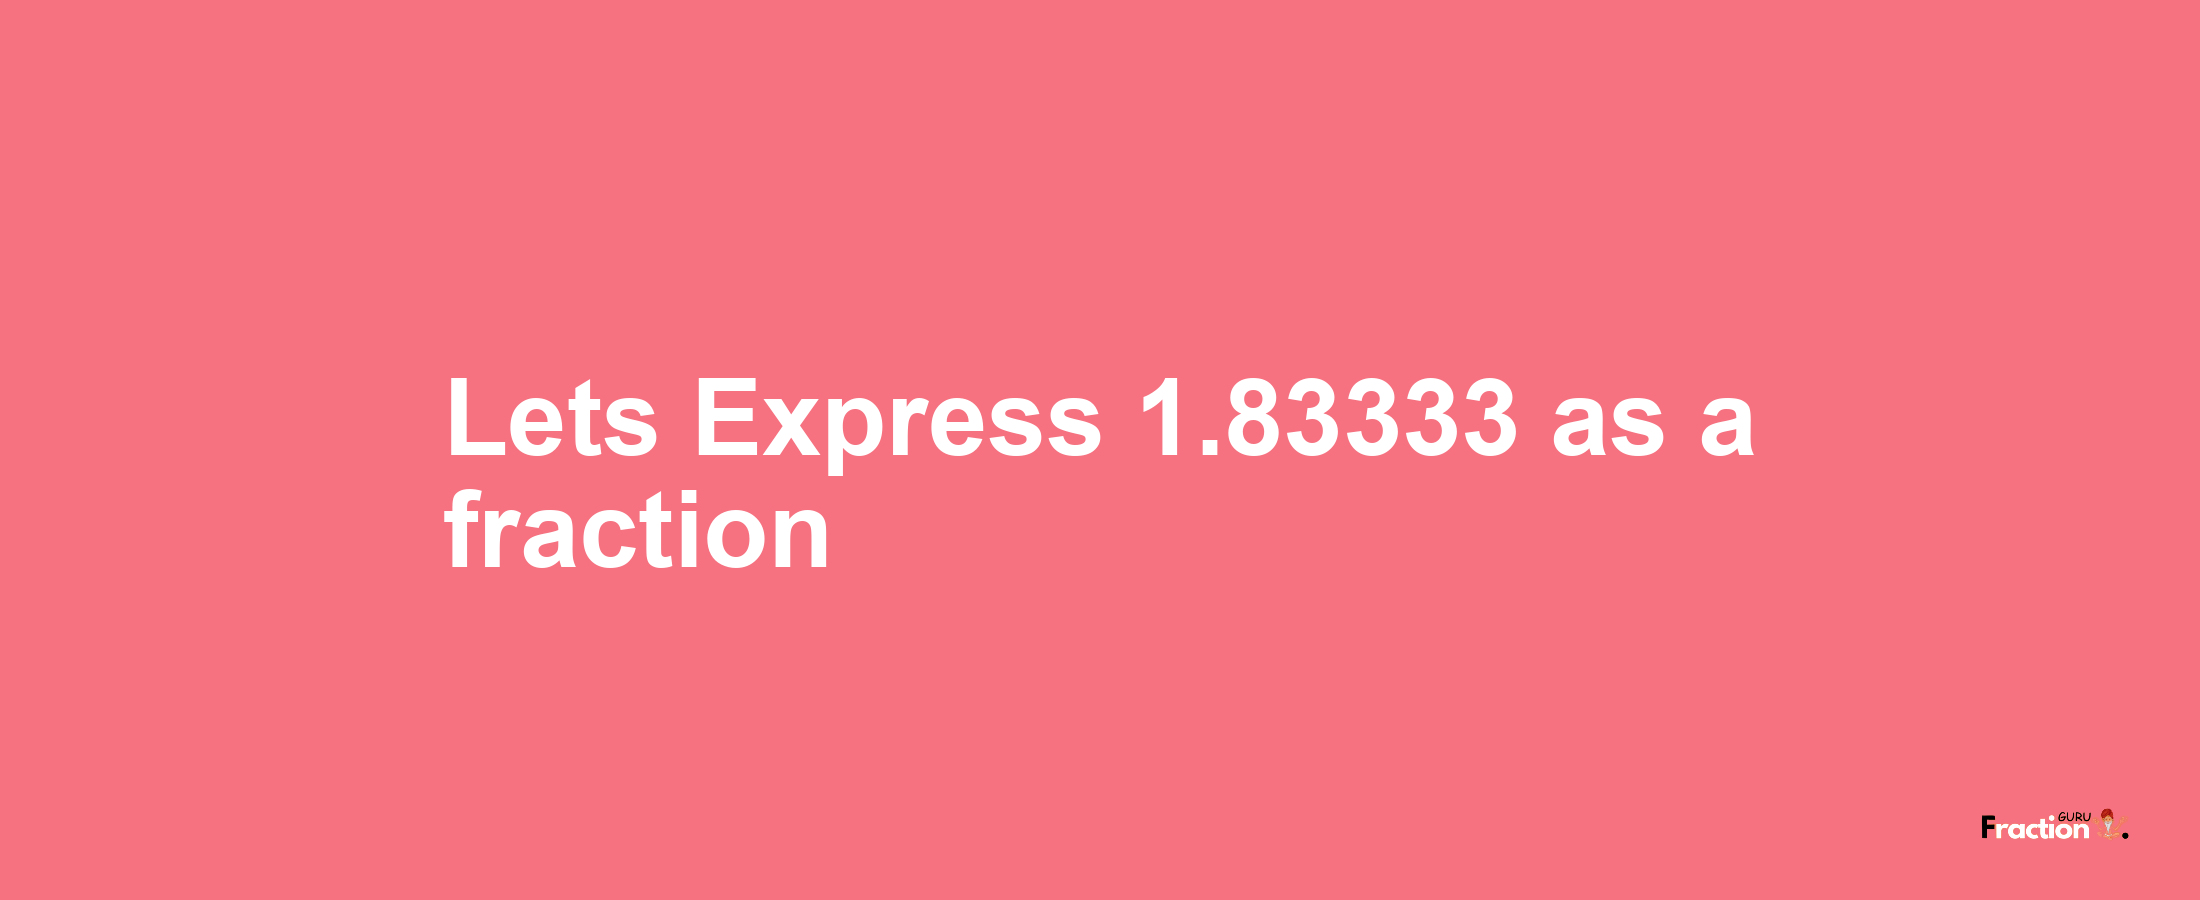 Lets Express 1.83333 as afraction